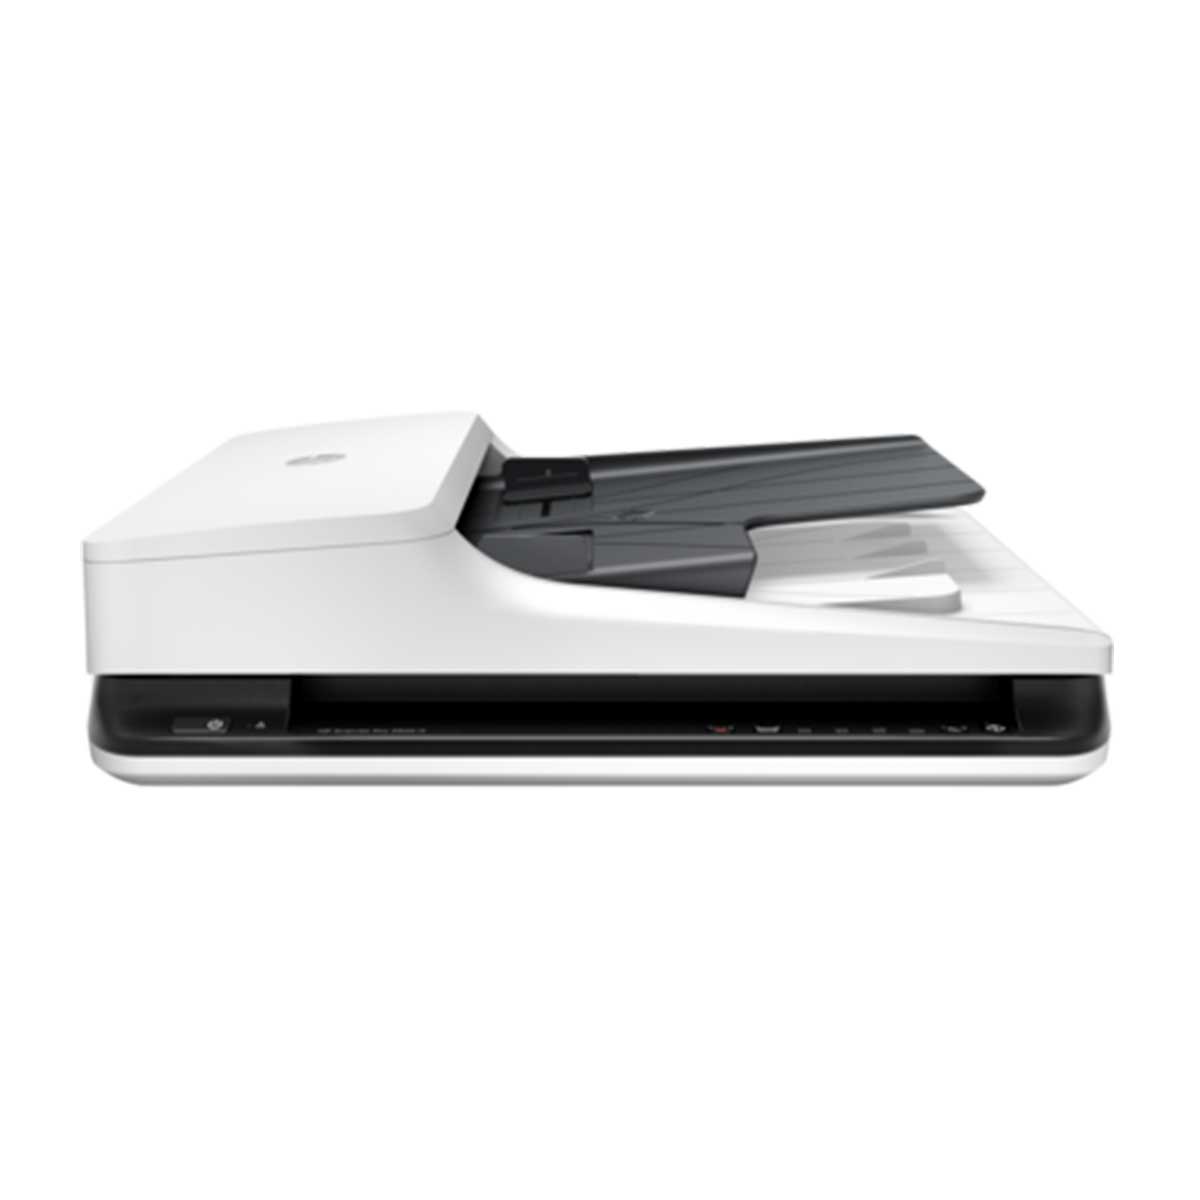 HP Scanjet 200 Flatbed Scanners